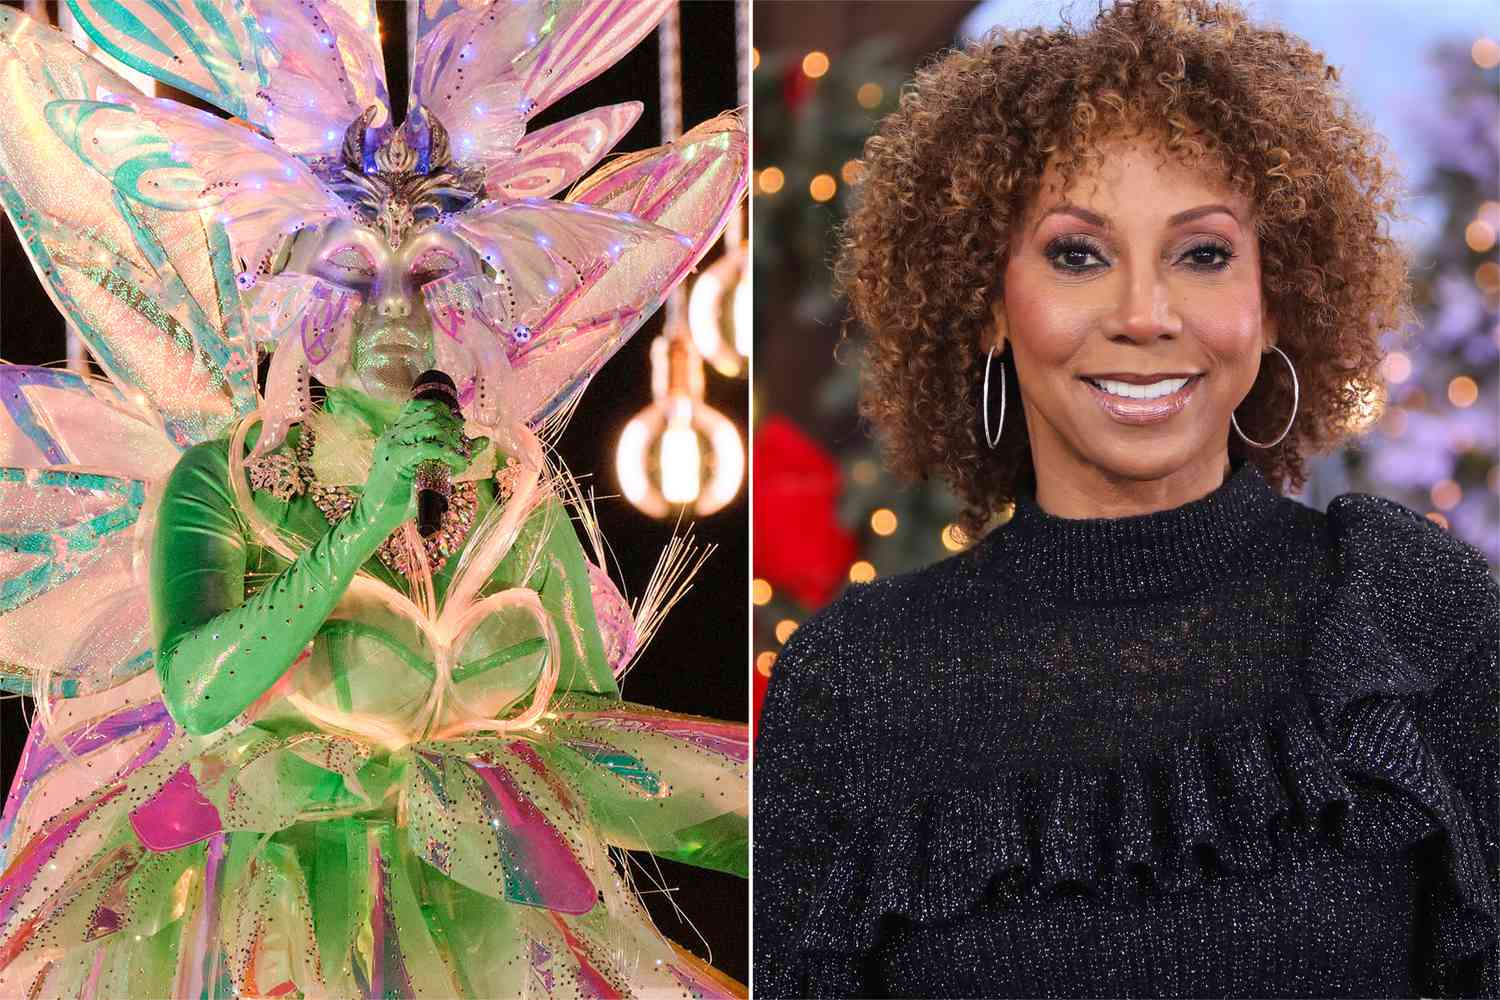 THE MASKED SINGER: Fairy in the “Country Night” episode of THE MASKED SINGER airing Wednesday, March 22 , Holly Robinson Peete visits Hallmark Channel's "Home & Family" at Universal Studios Hollywood on November 17, 2020 in Universal City, California.